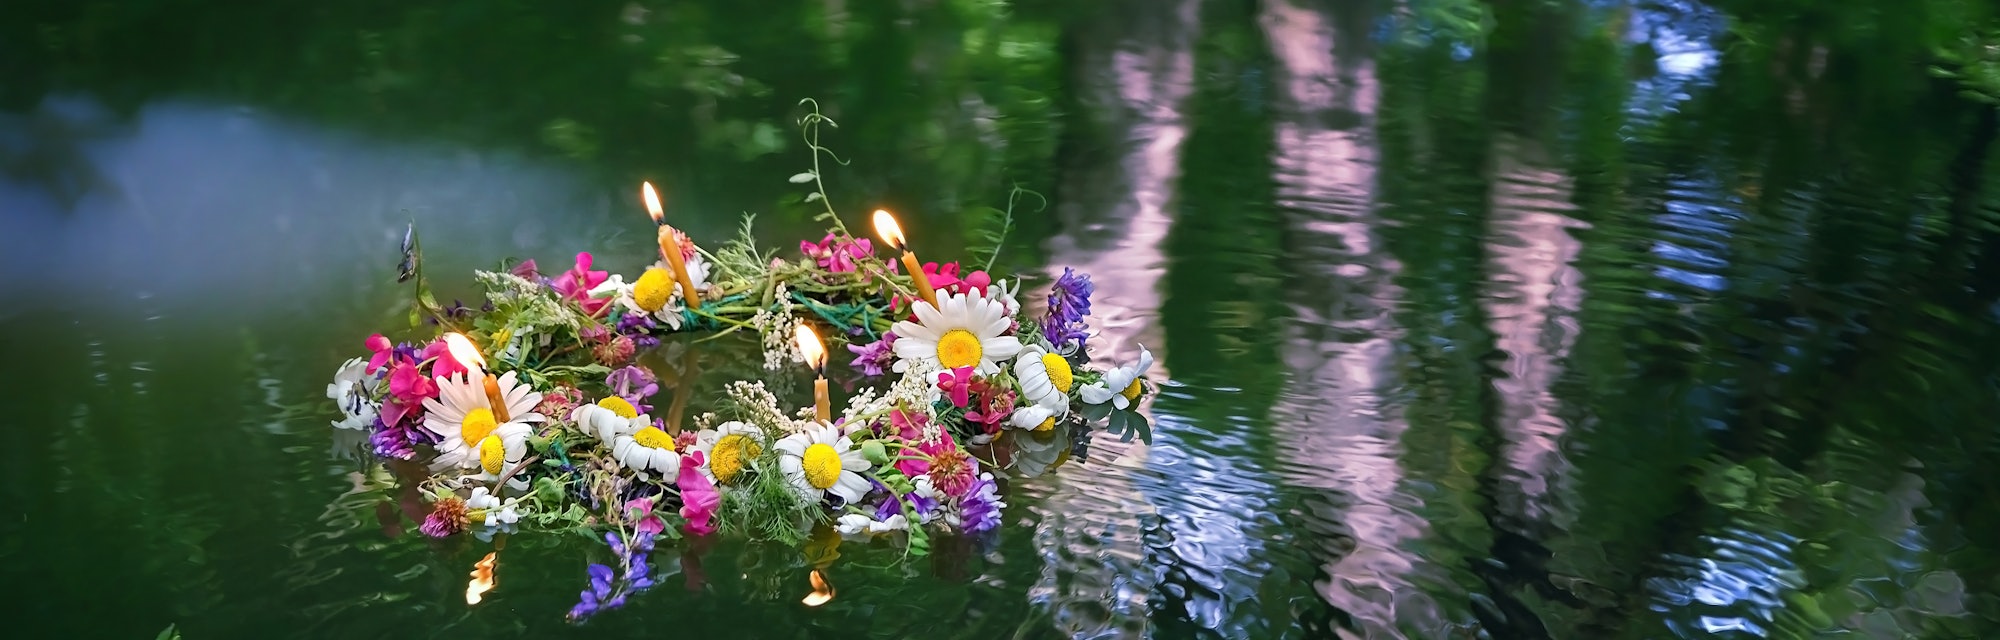 flowers wreath with burning candles in water. old national tradition, fortune telling for pagan holi...